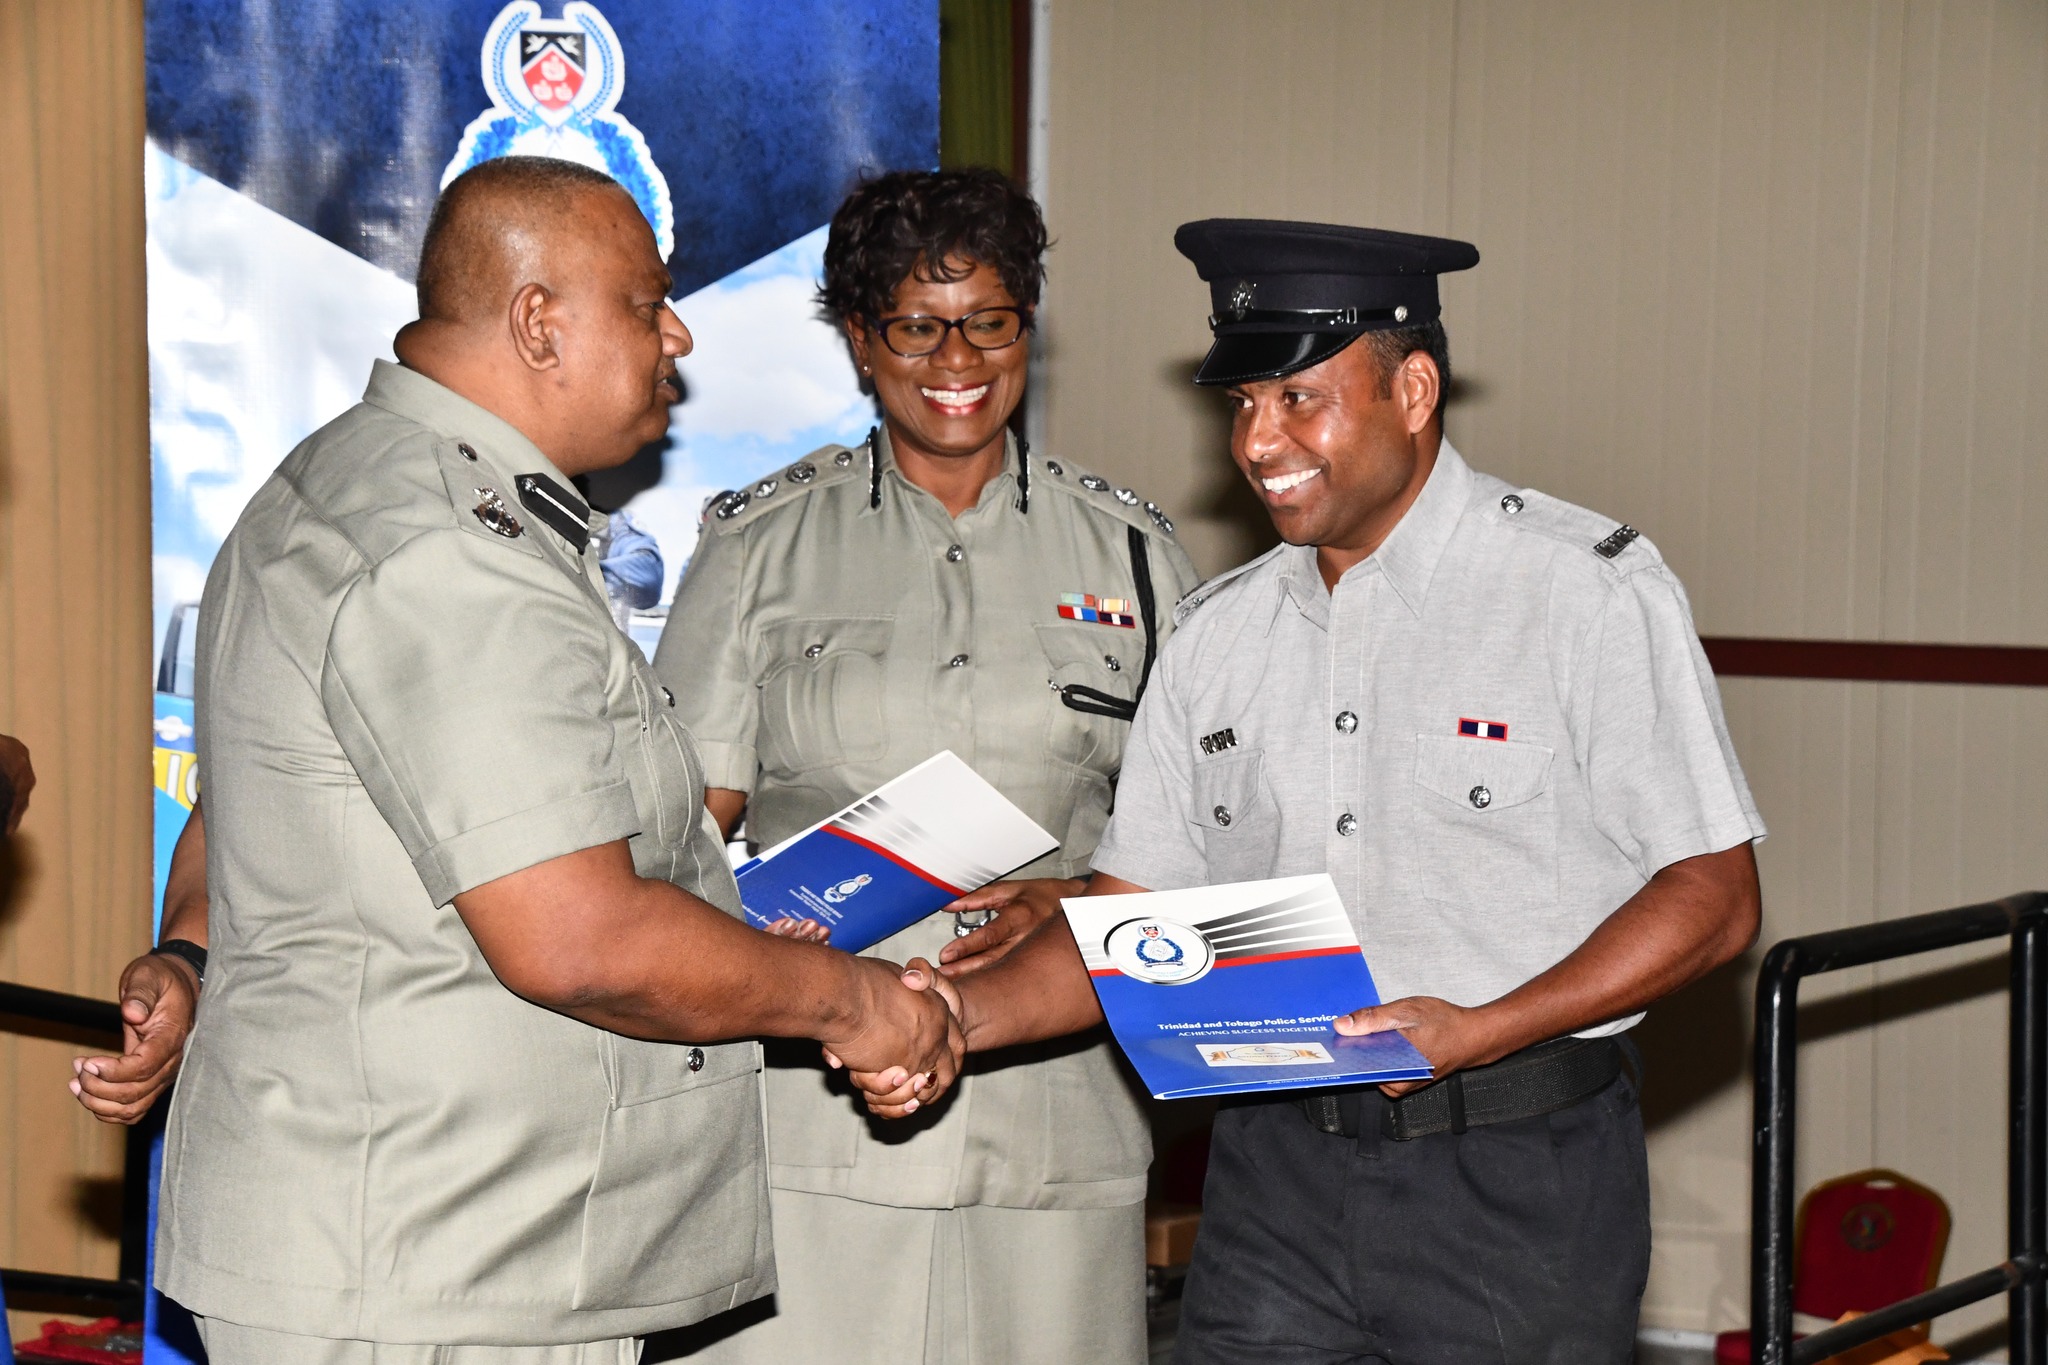 921 police officers promoted